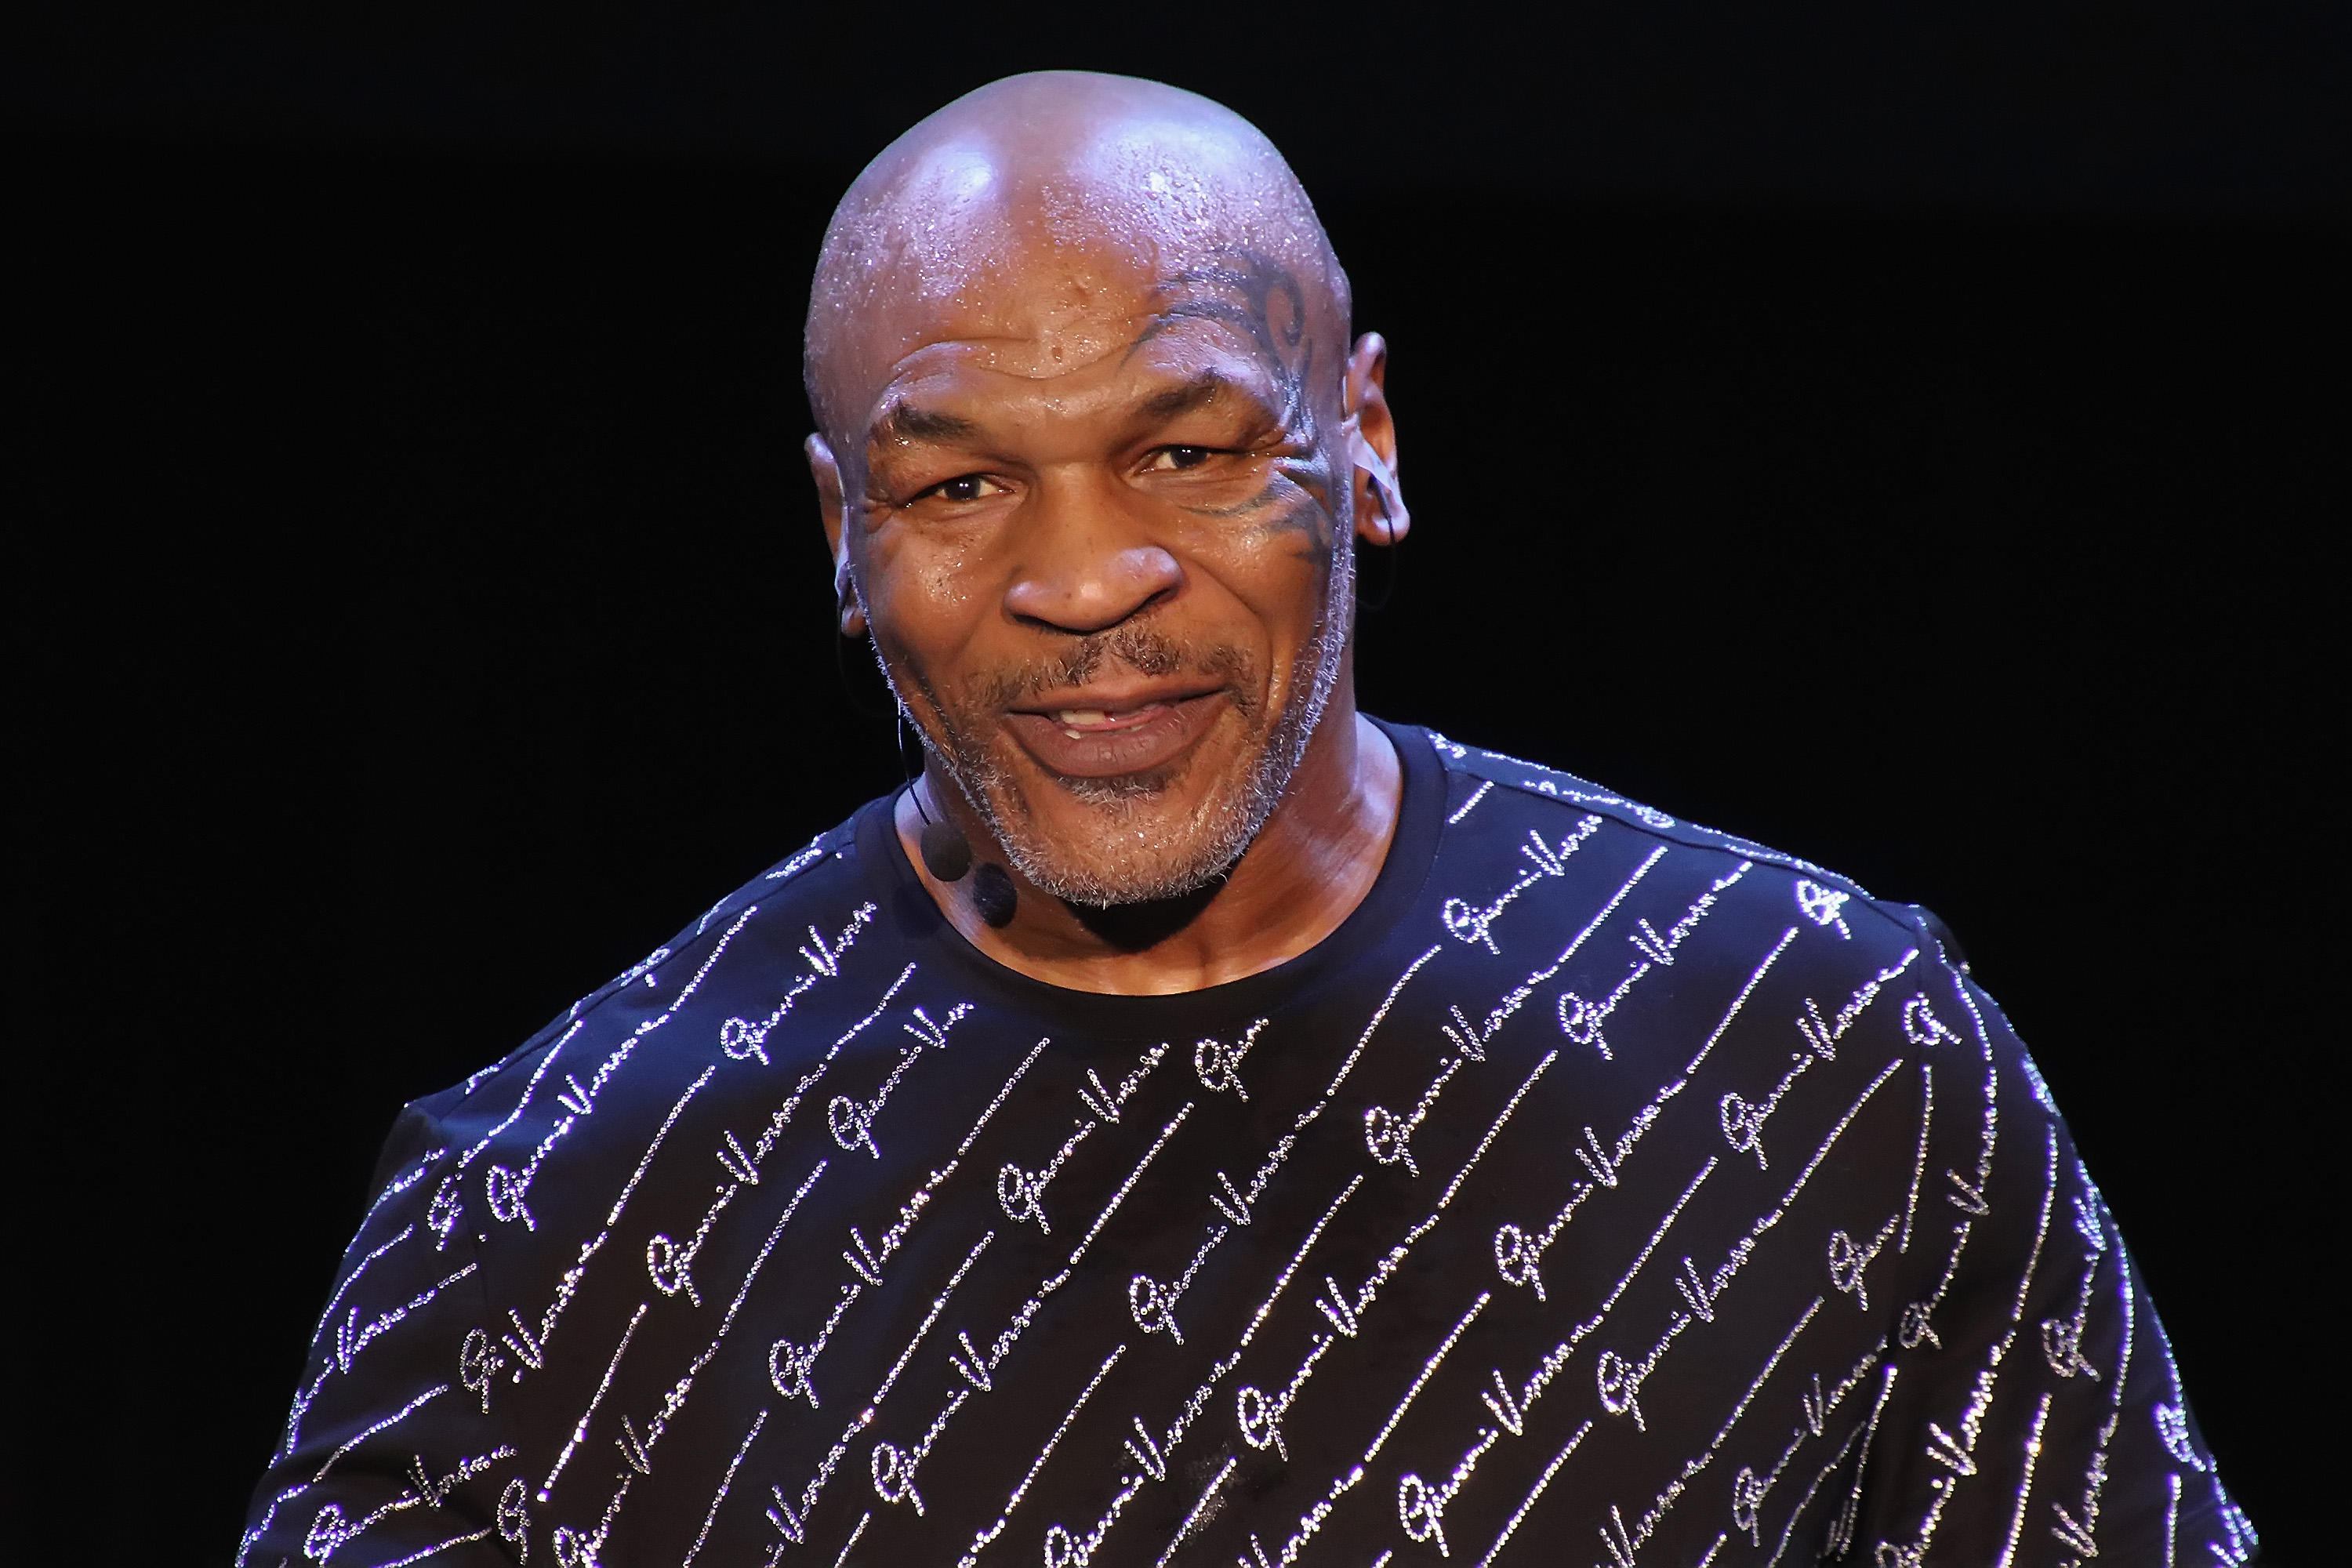 Mike Tyson finally reacts to Tyson Fury's win over Deontay Wilder saying ''Both boxers reached all-time great status'' 